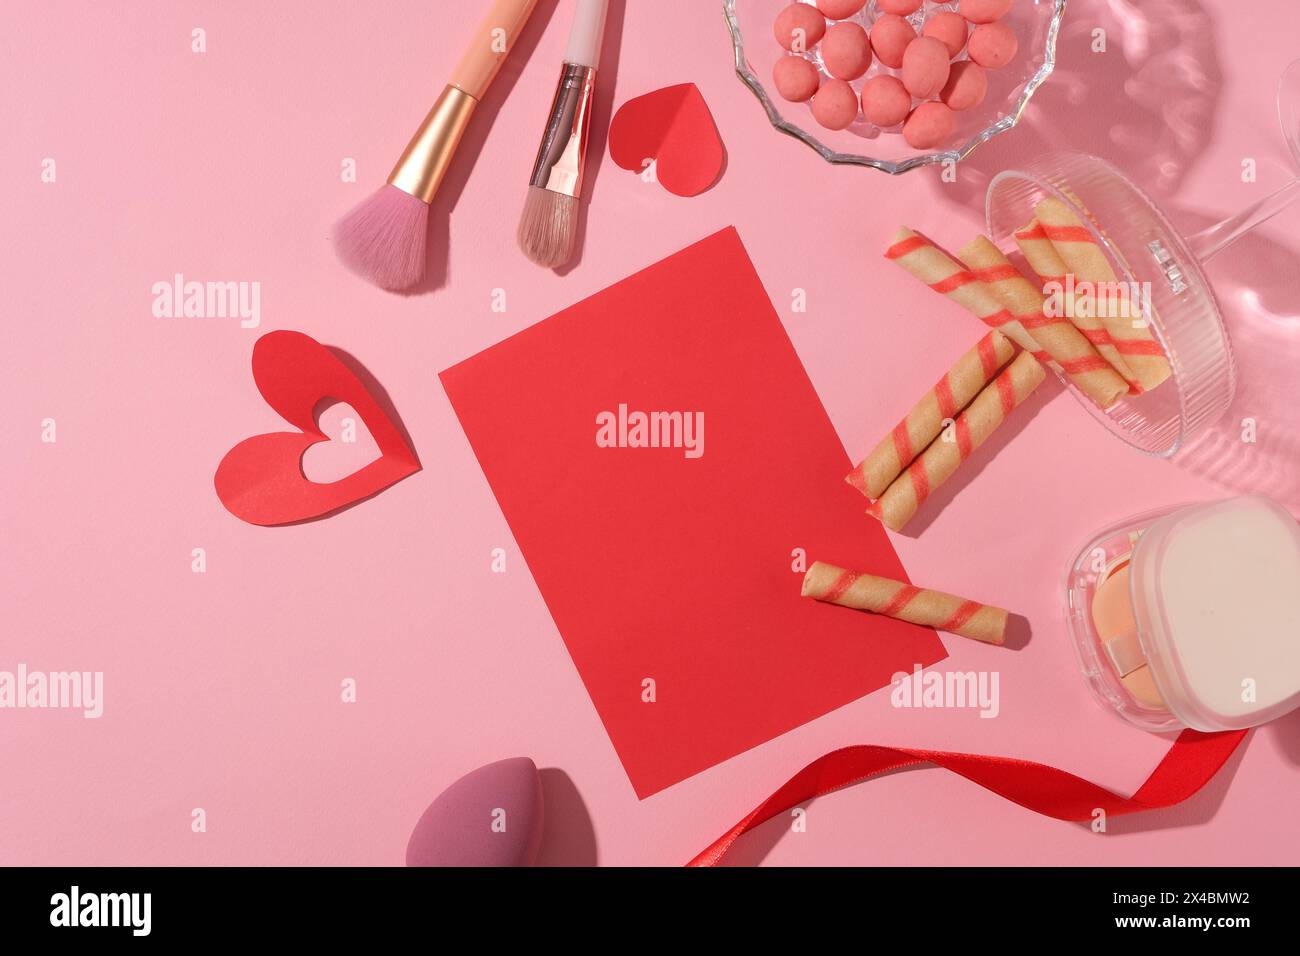 Decorate Valentine's cards with makeup and sweet cakes. Red paper plate with cake, chocolate, cushion and makeup brush on pink background. Top view an Stock Photo